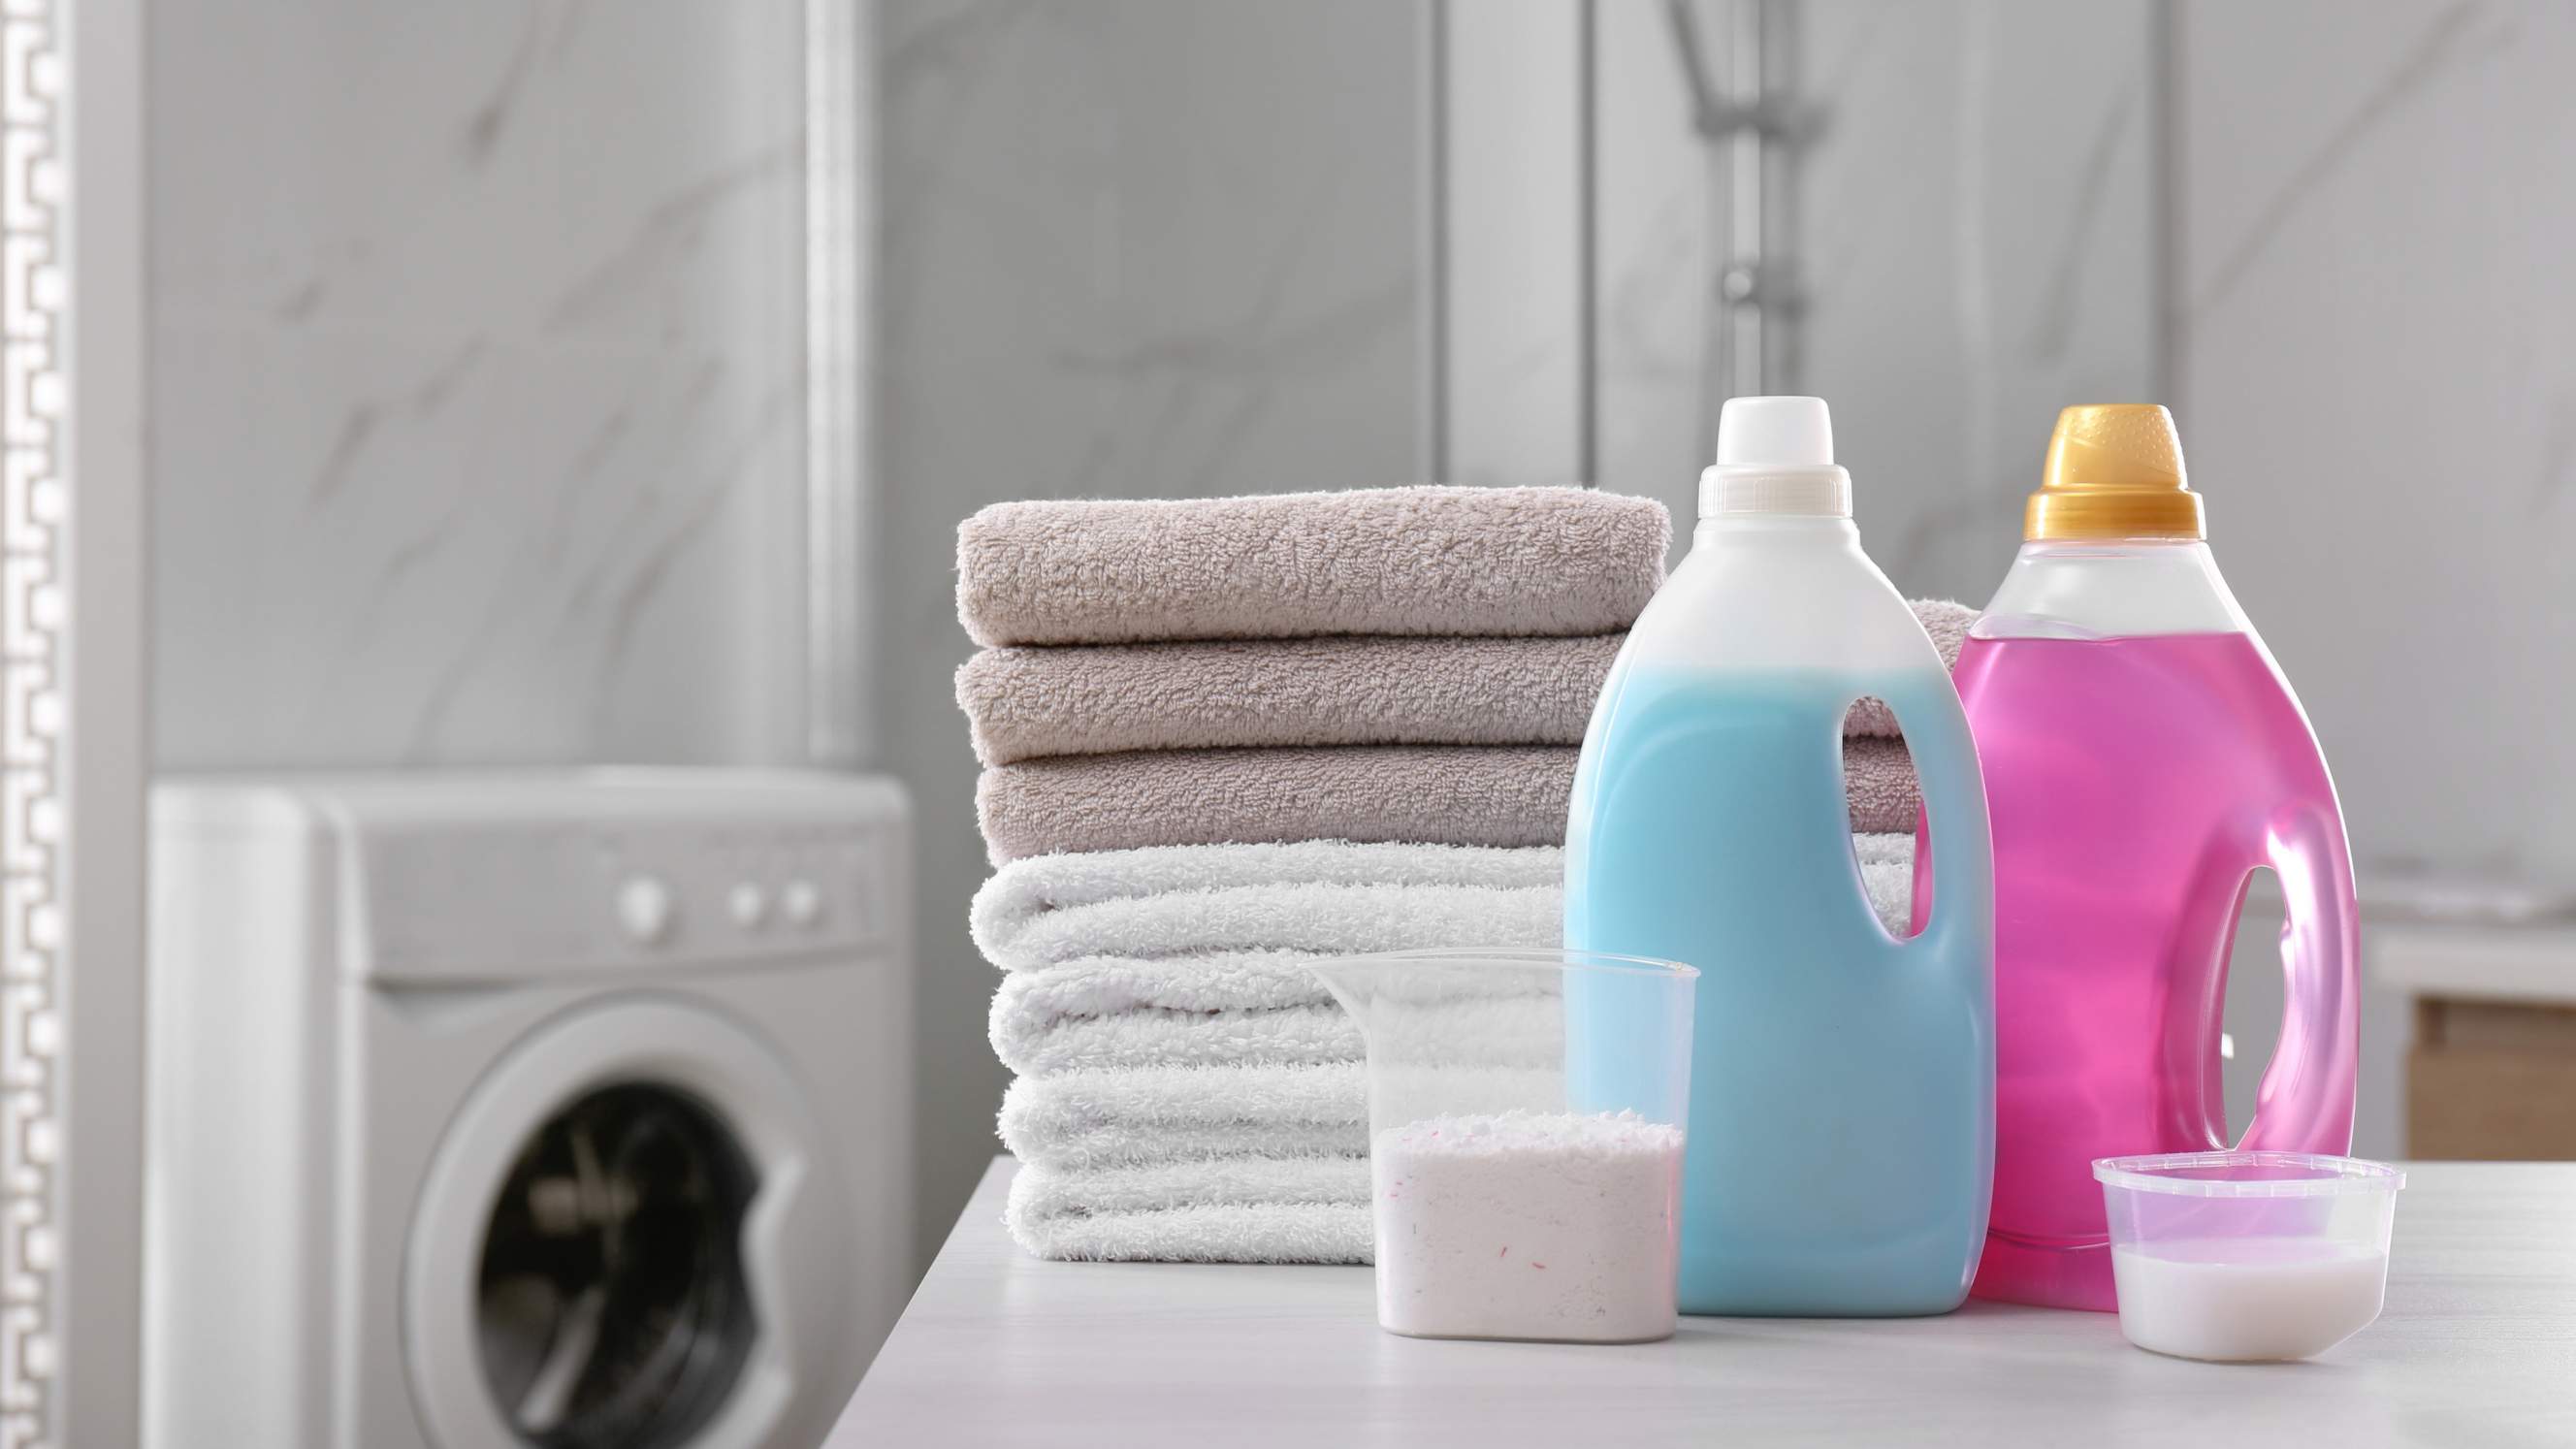 Fabric softener vs. detergent - Detergent and fabric softener with stack of folded towels on white table in bathroom